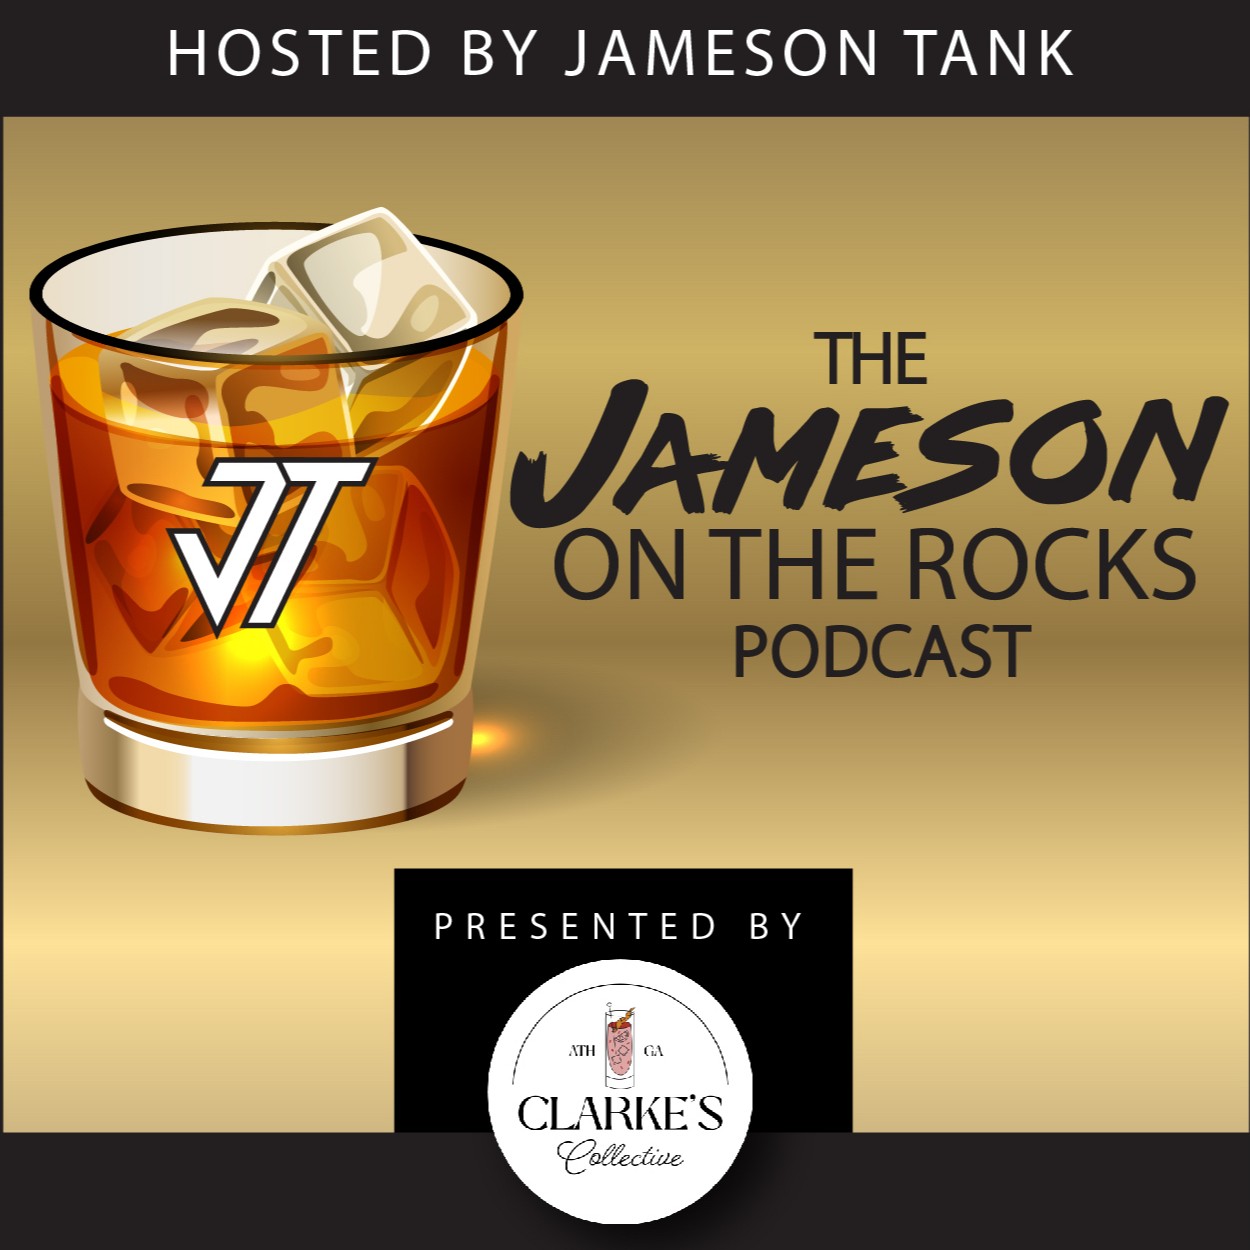 The Jameson on the Rocks Podcast